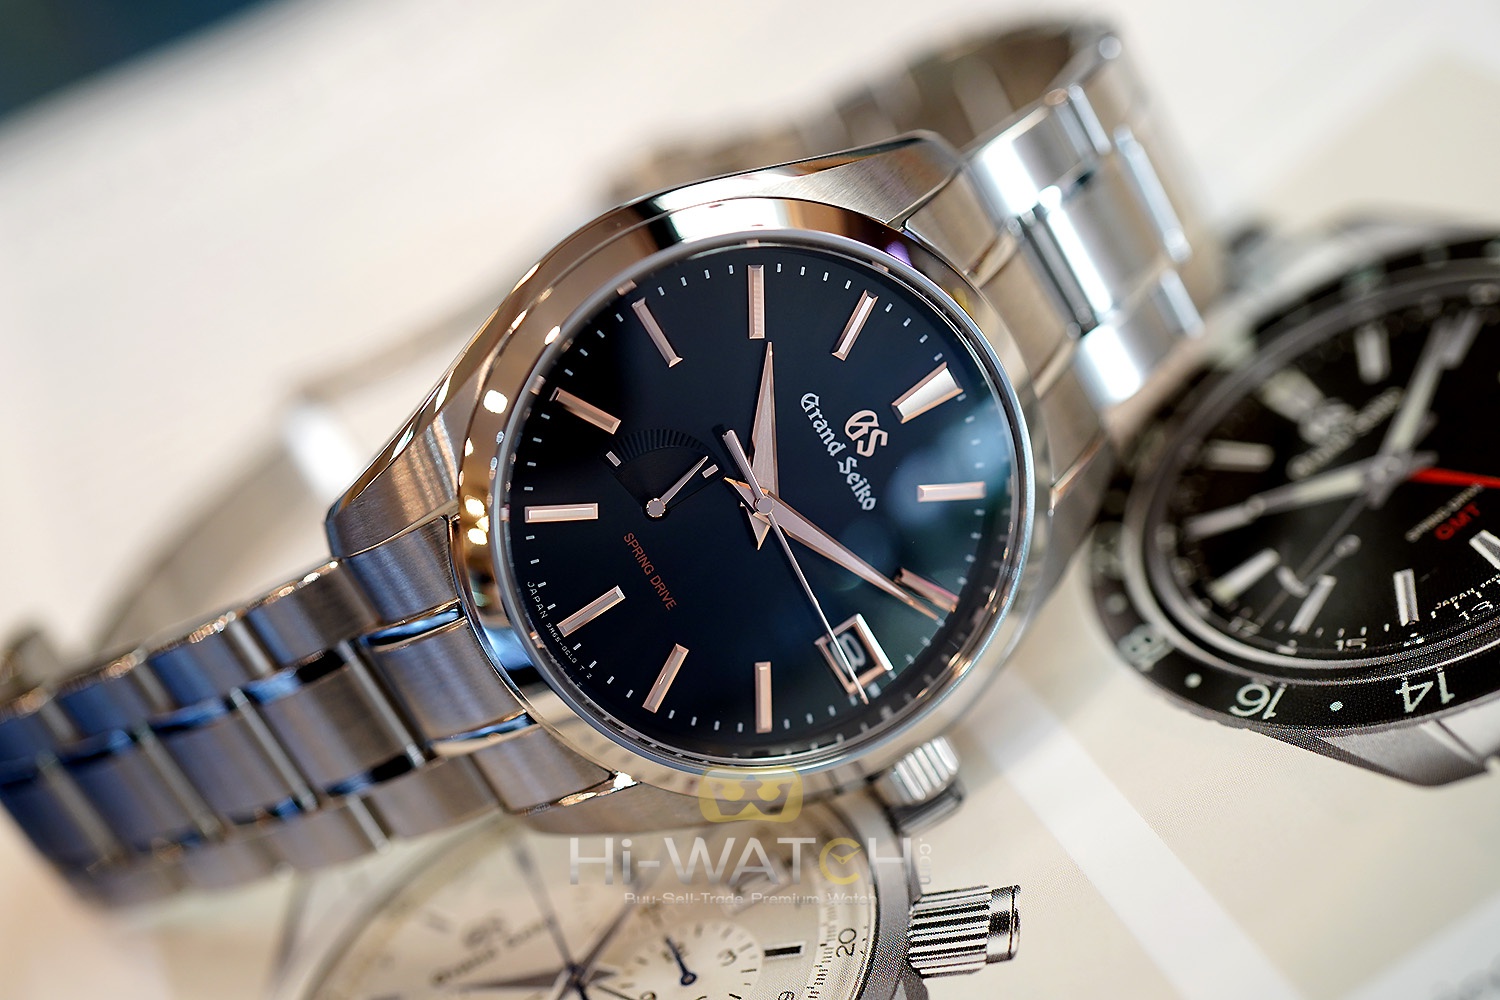 Grand Seiko Heritage Collection Spring Drive Black Dial (Boutique Limited  Edition) 41 mm SBGA401 (Thai AD 08/2020) 